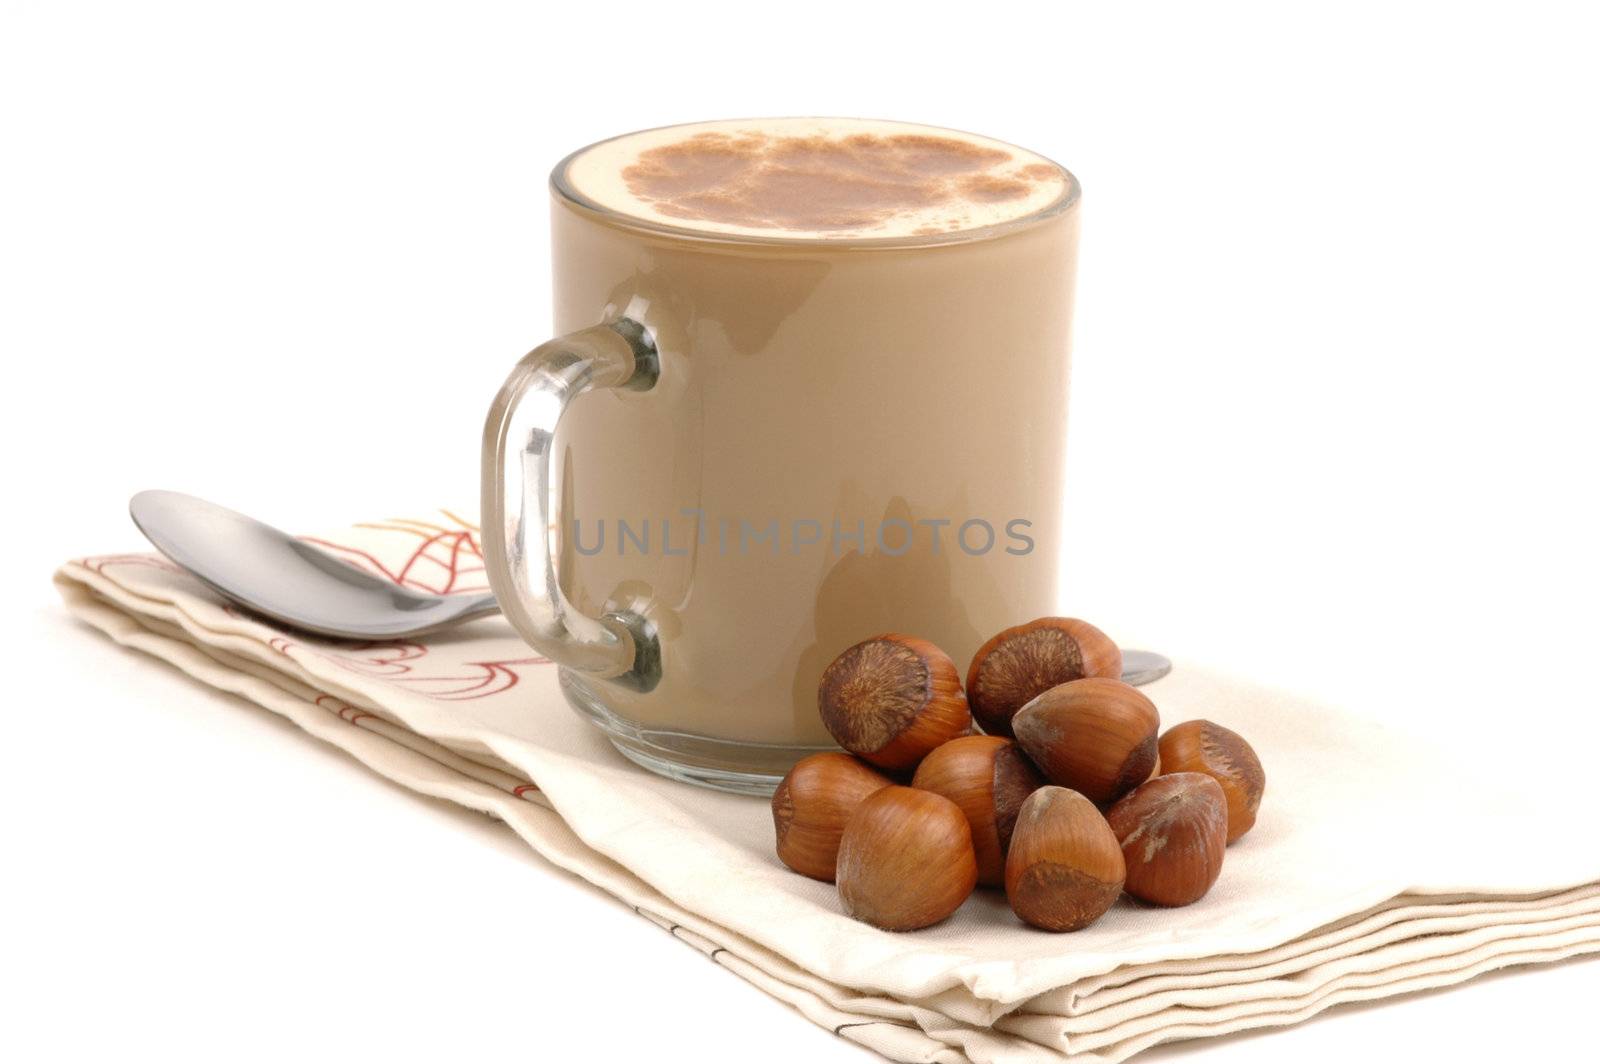 Cup of cappuccino with hazelnuts in the shell.